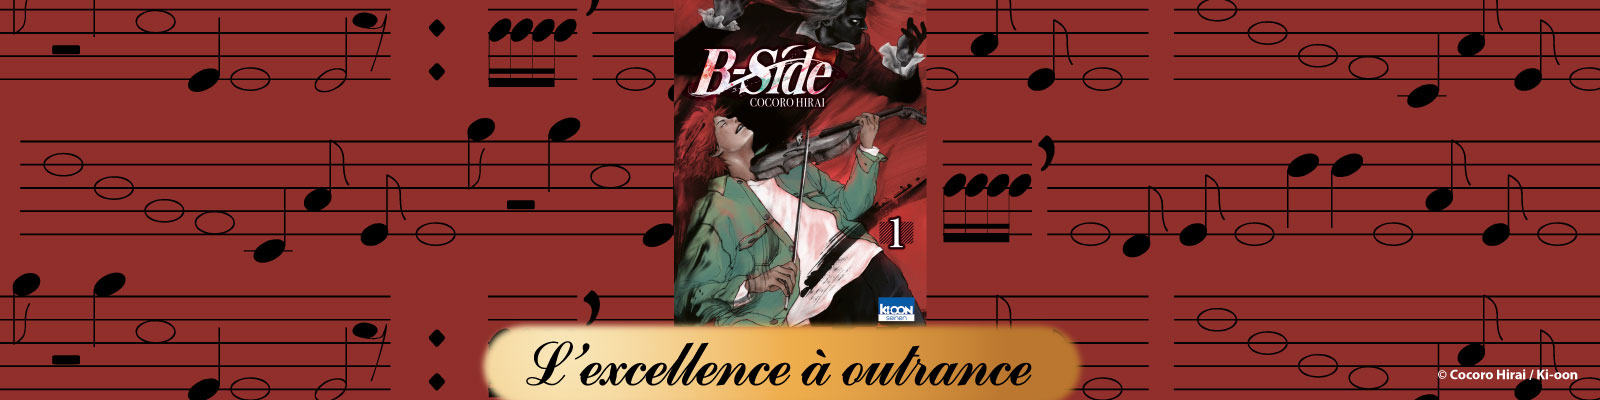 B-Side-T1---L’excellence--outrance--outranceB-Side-T1---L’excellence-à--2